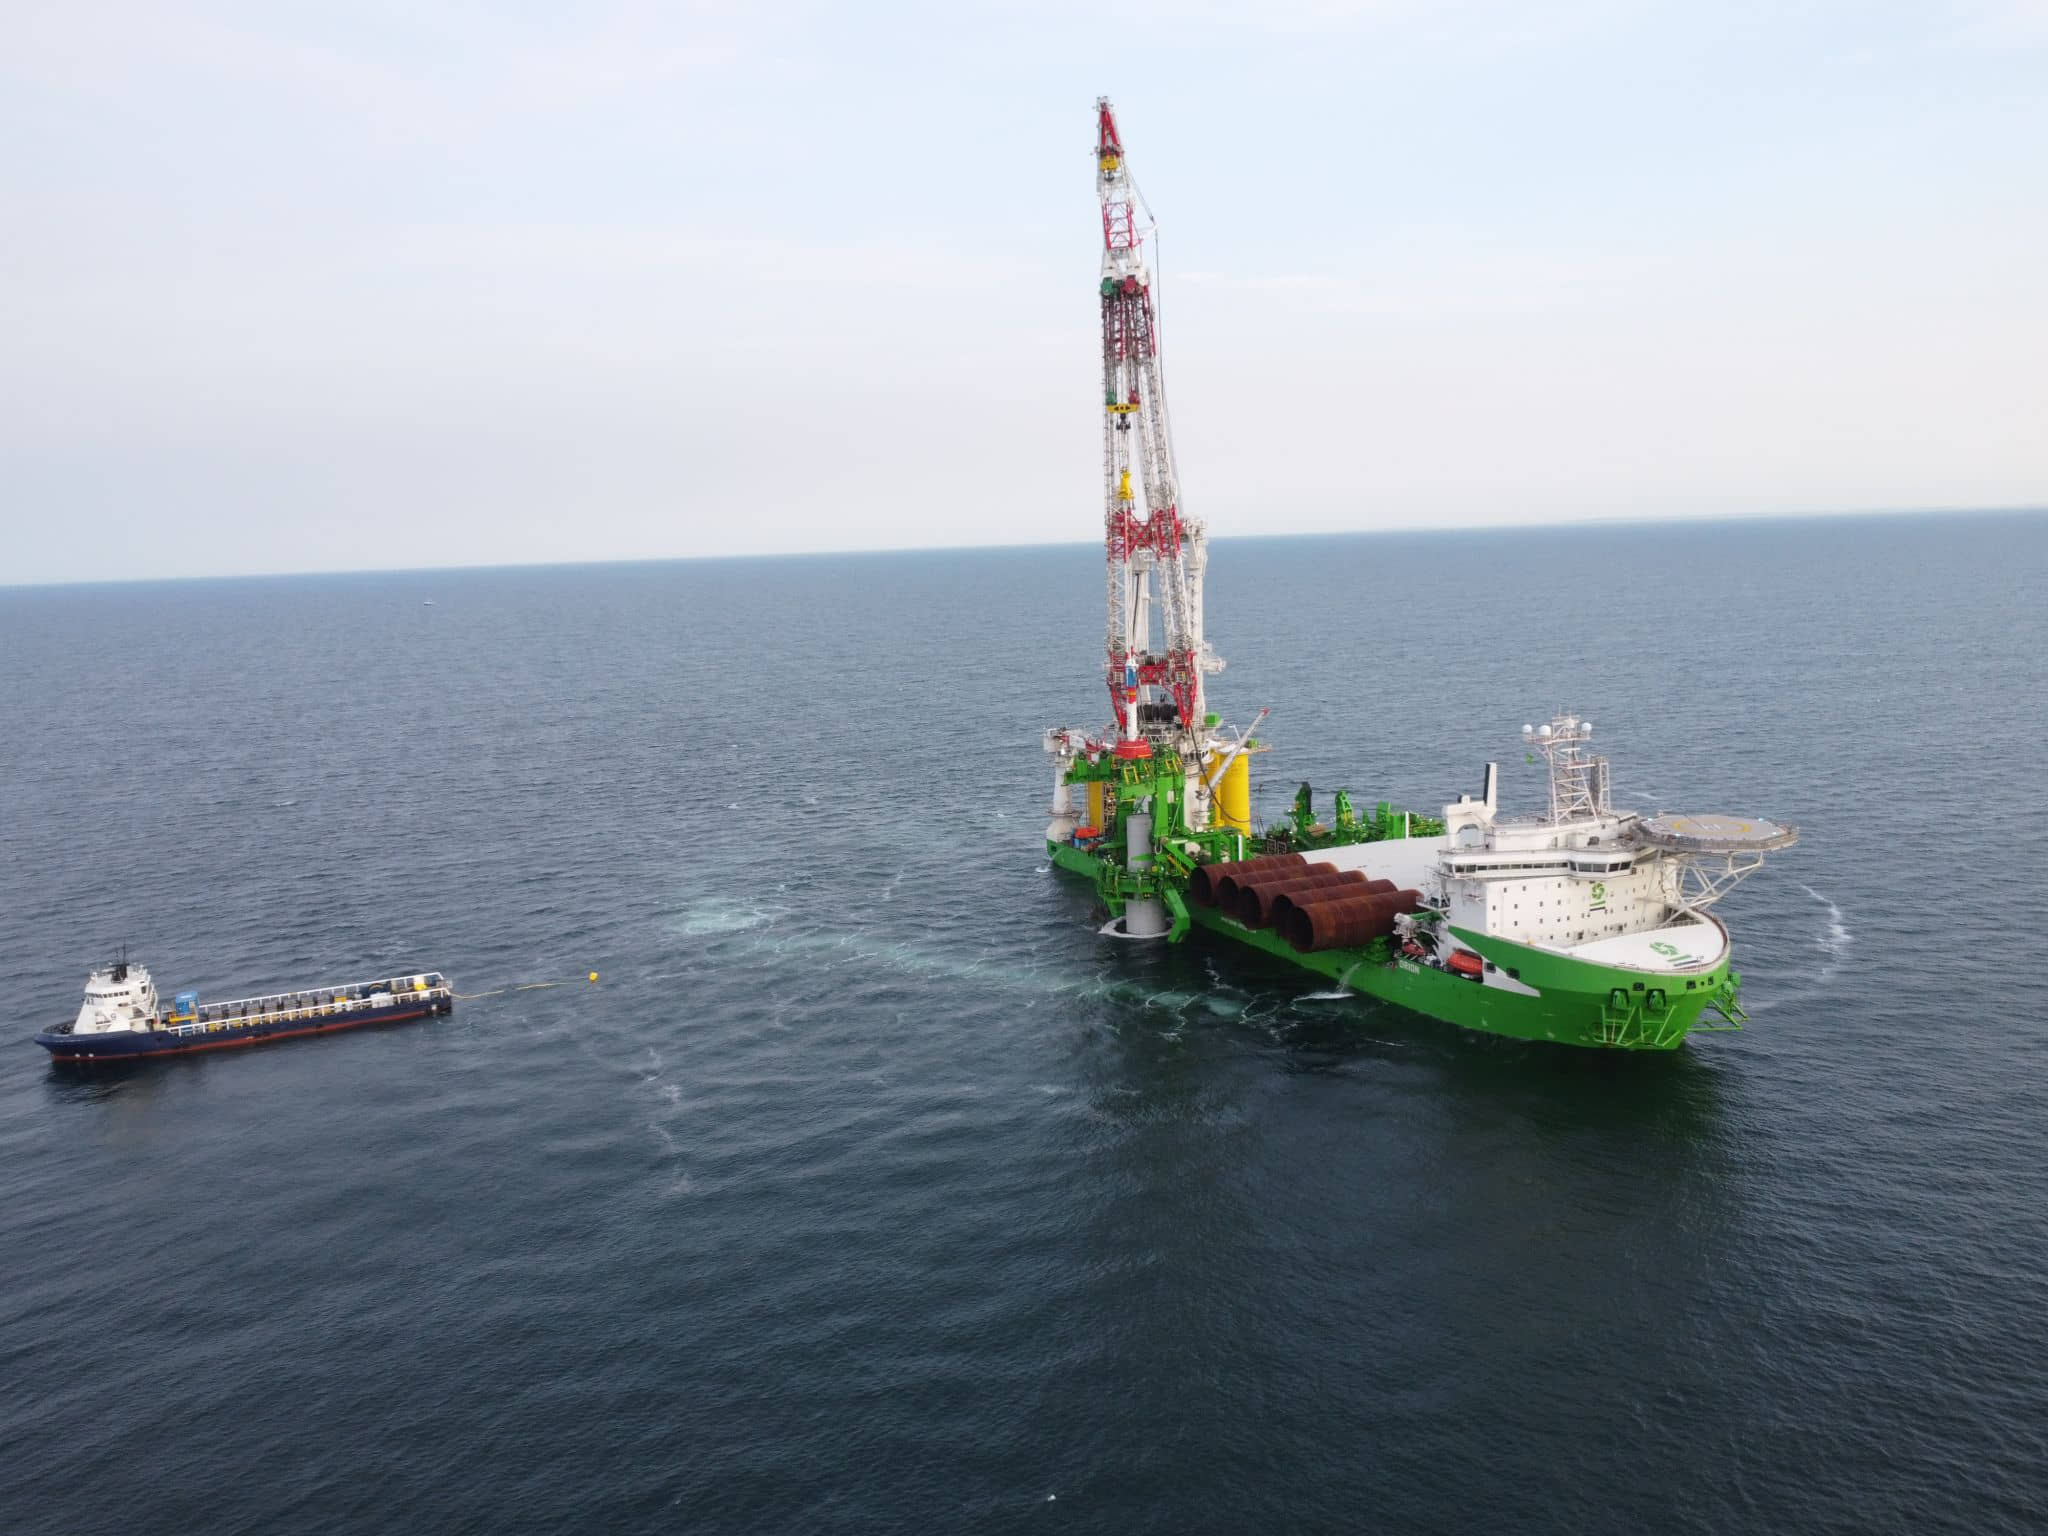 Following start-up of offshore works at the Vineyard Wind 1 project in the U.S., DEME's Orion specialised floating offshore installation vessel successfully installed the first of 62 foundations; Source: DEME